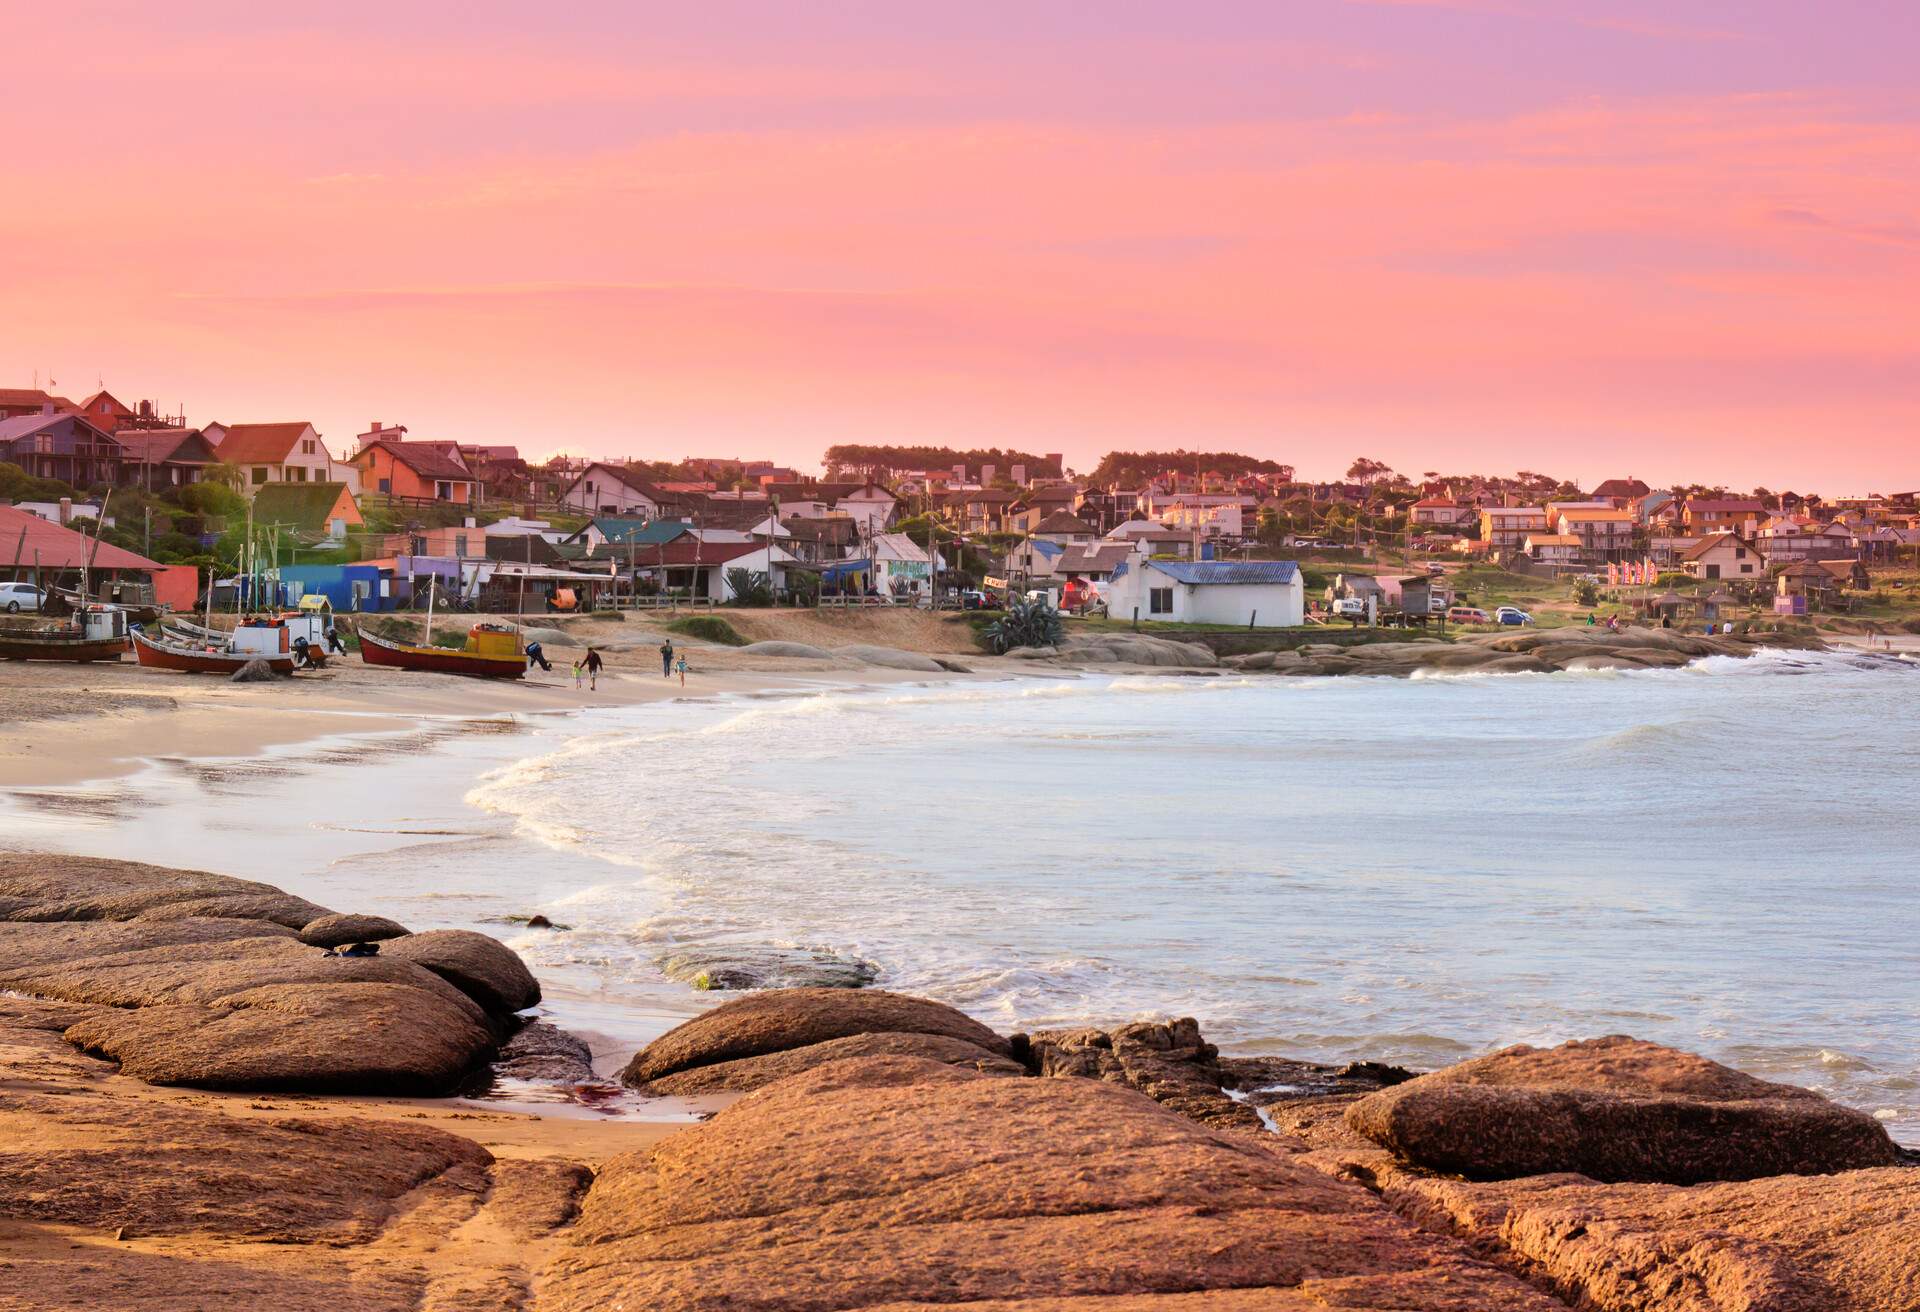 A coastal fishing village with old and colourful houses overlooking the tranquil sea under the scenic twilight sky.